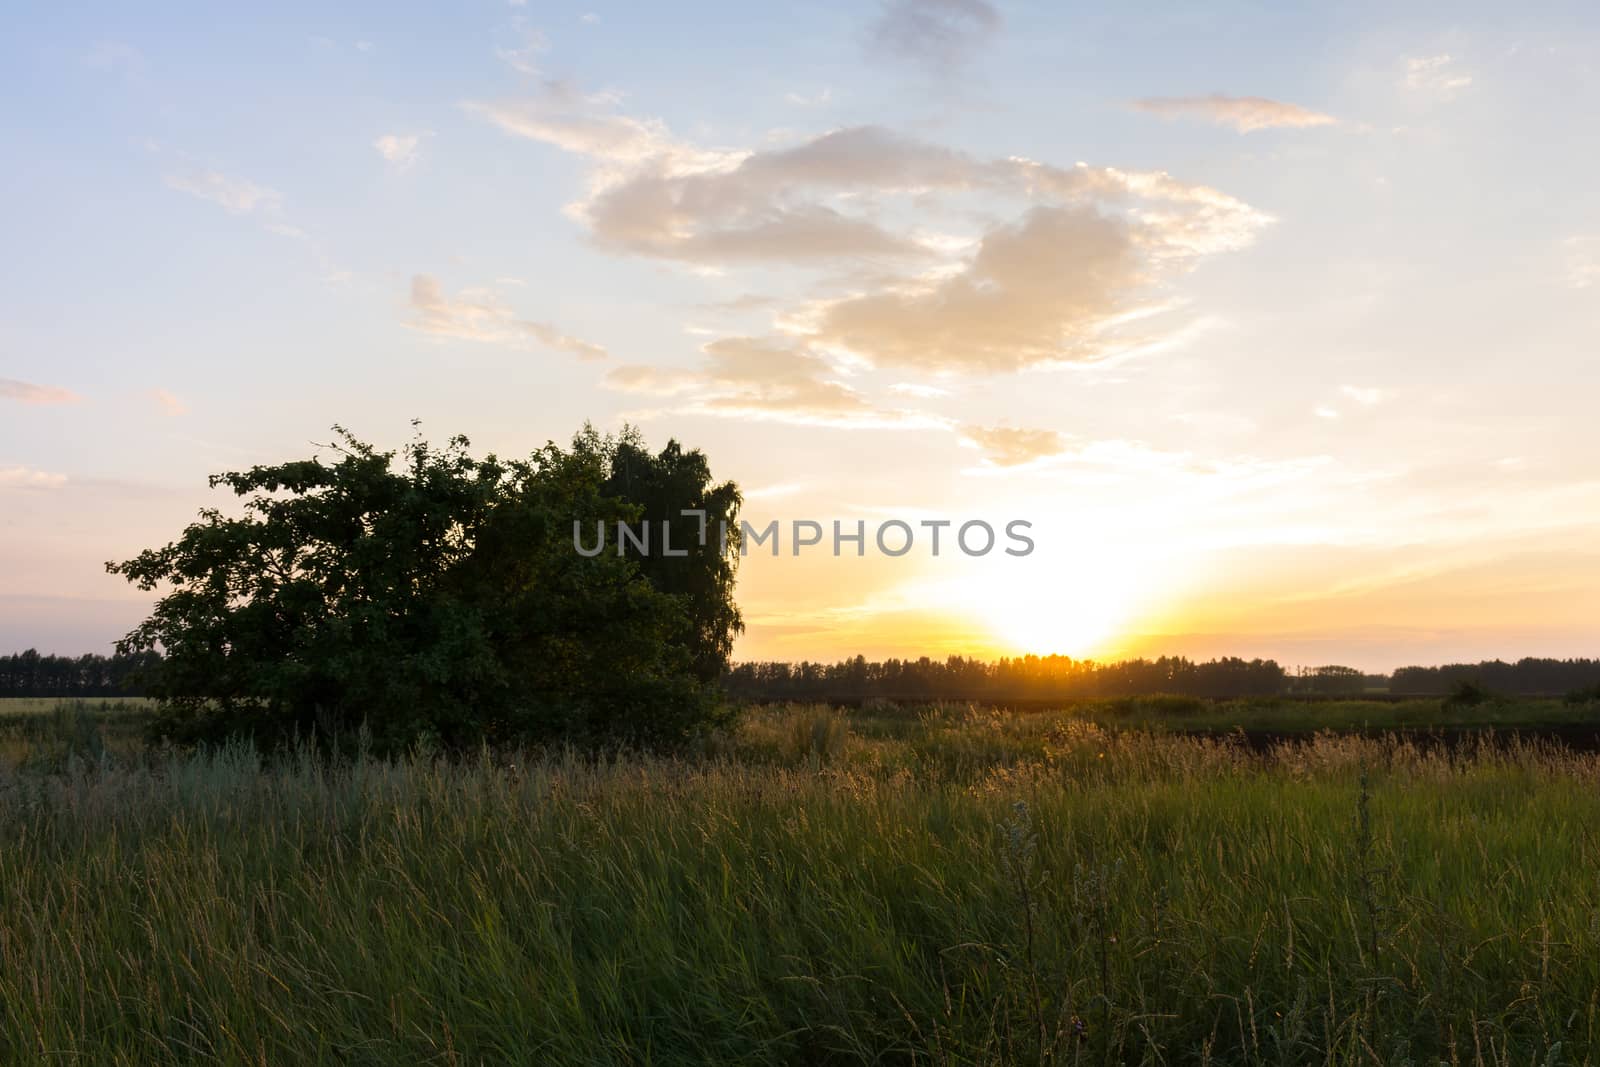 The picture shows a sunset by AlexBush